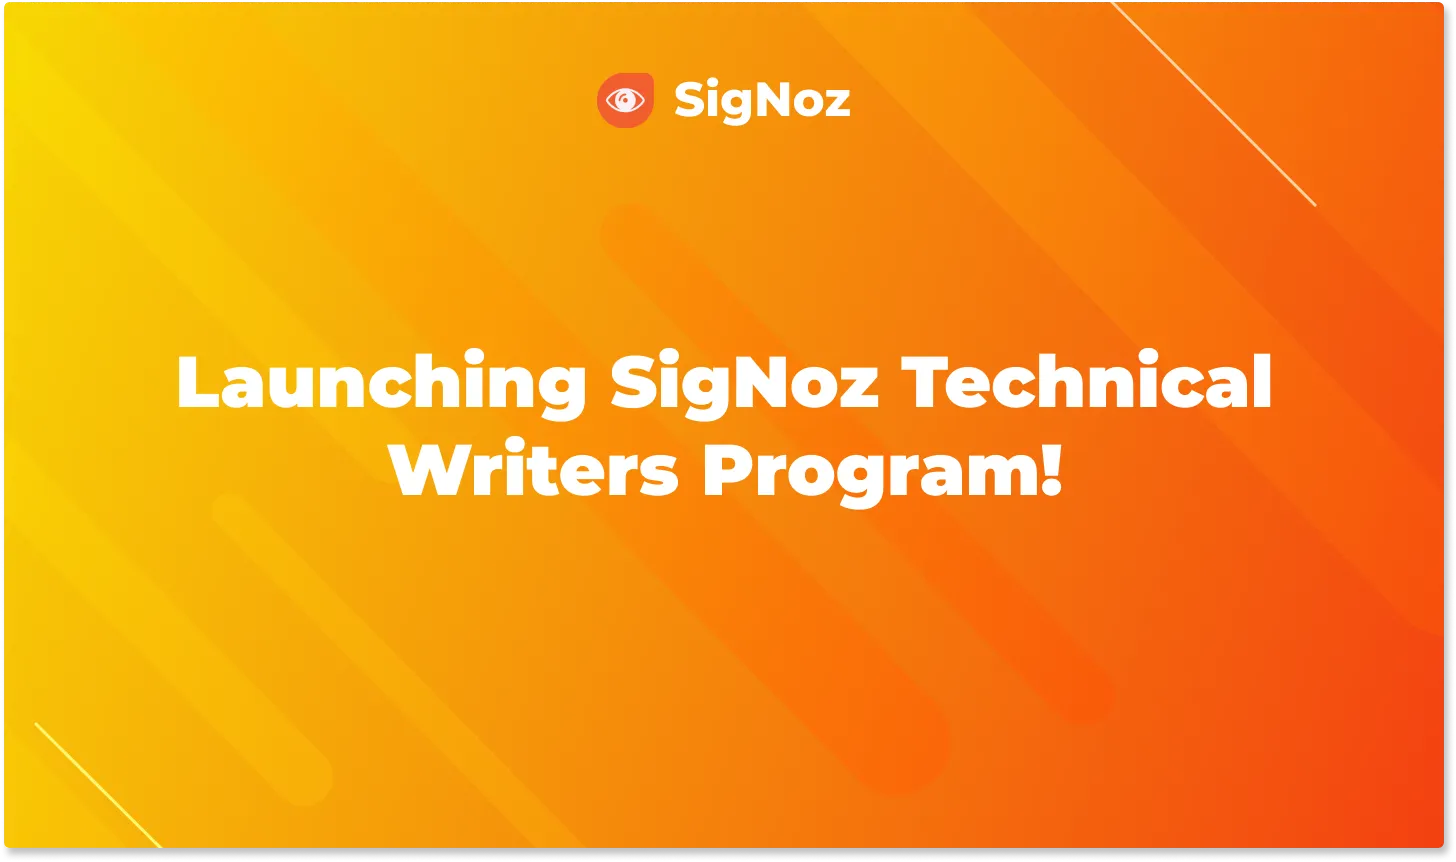 Write tech tutorials, blogs for SigNoz with its technical writer program, build your digital presence and get paid to do it